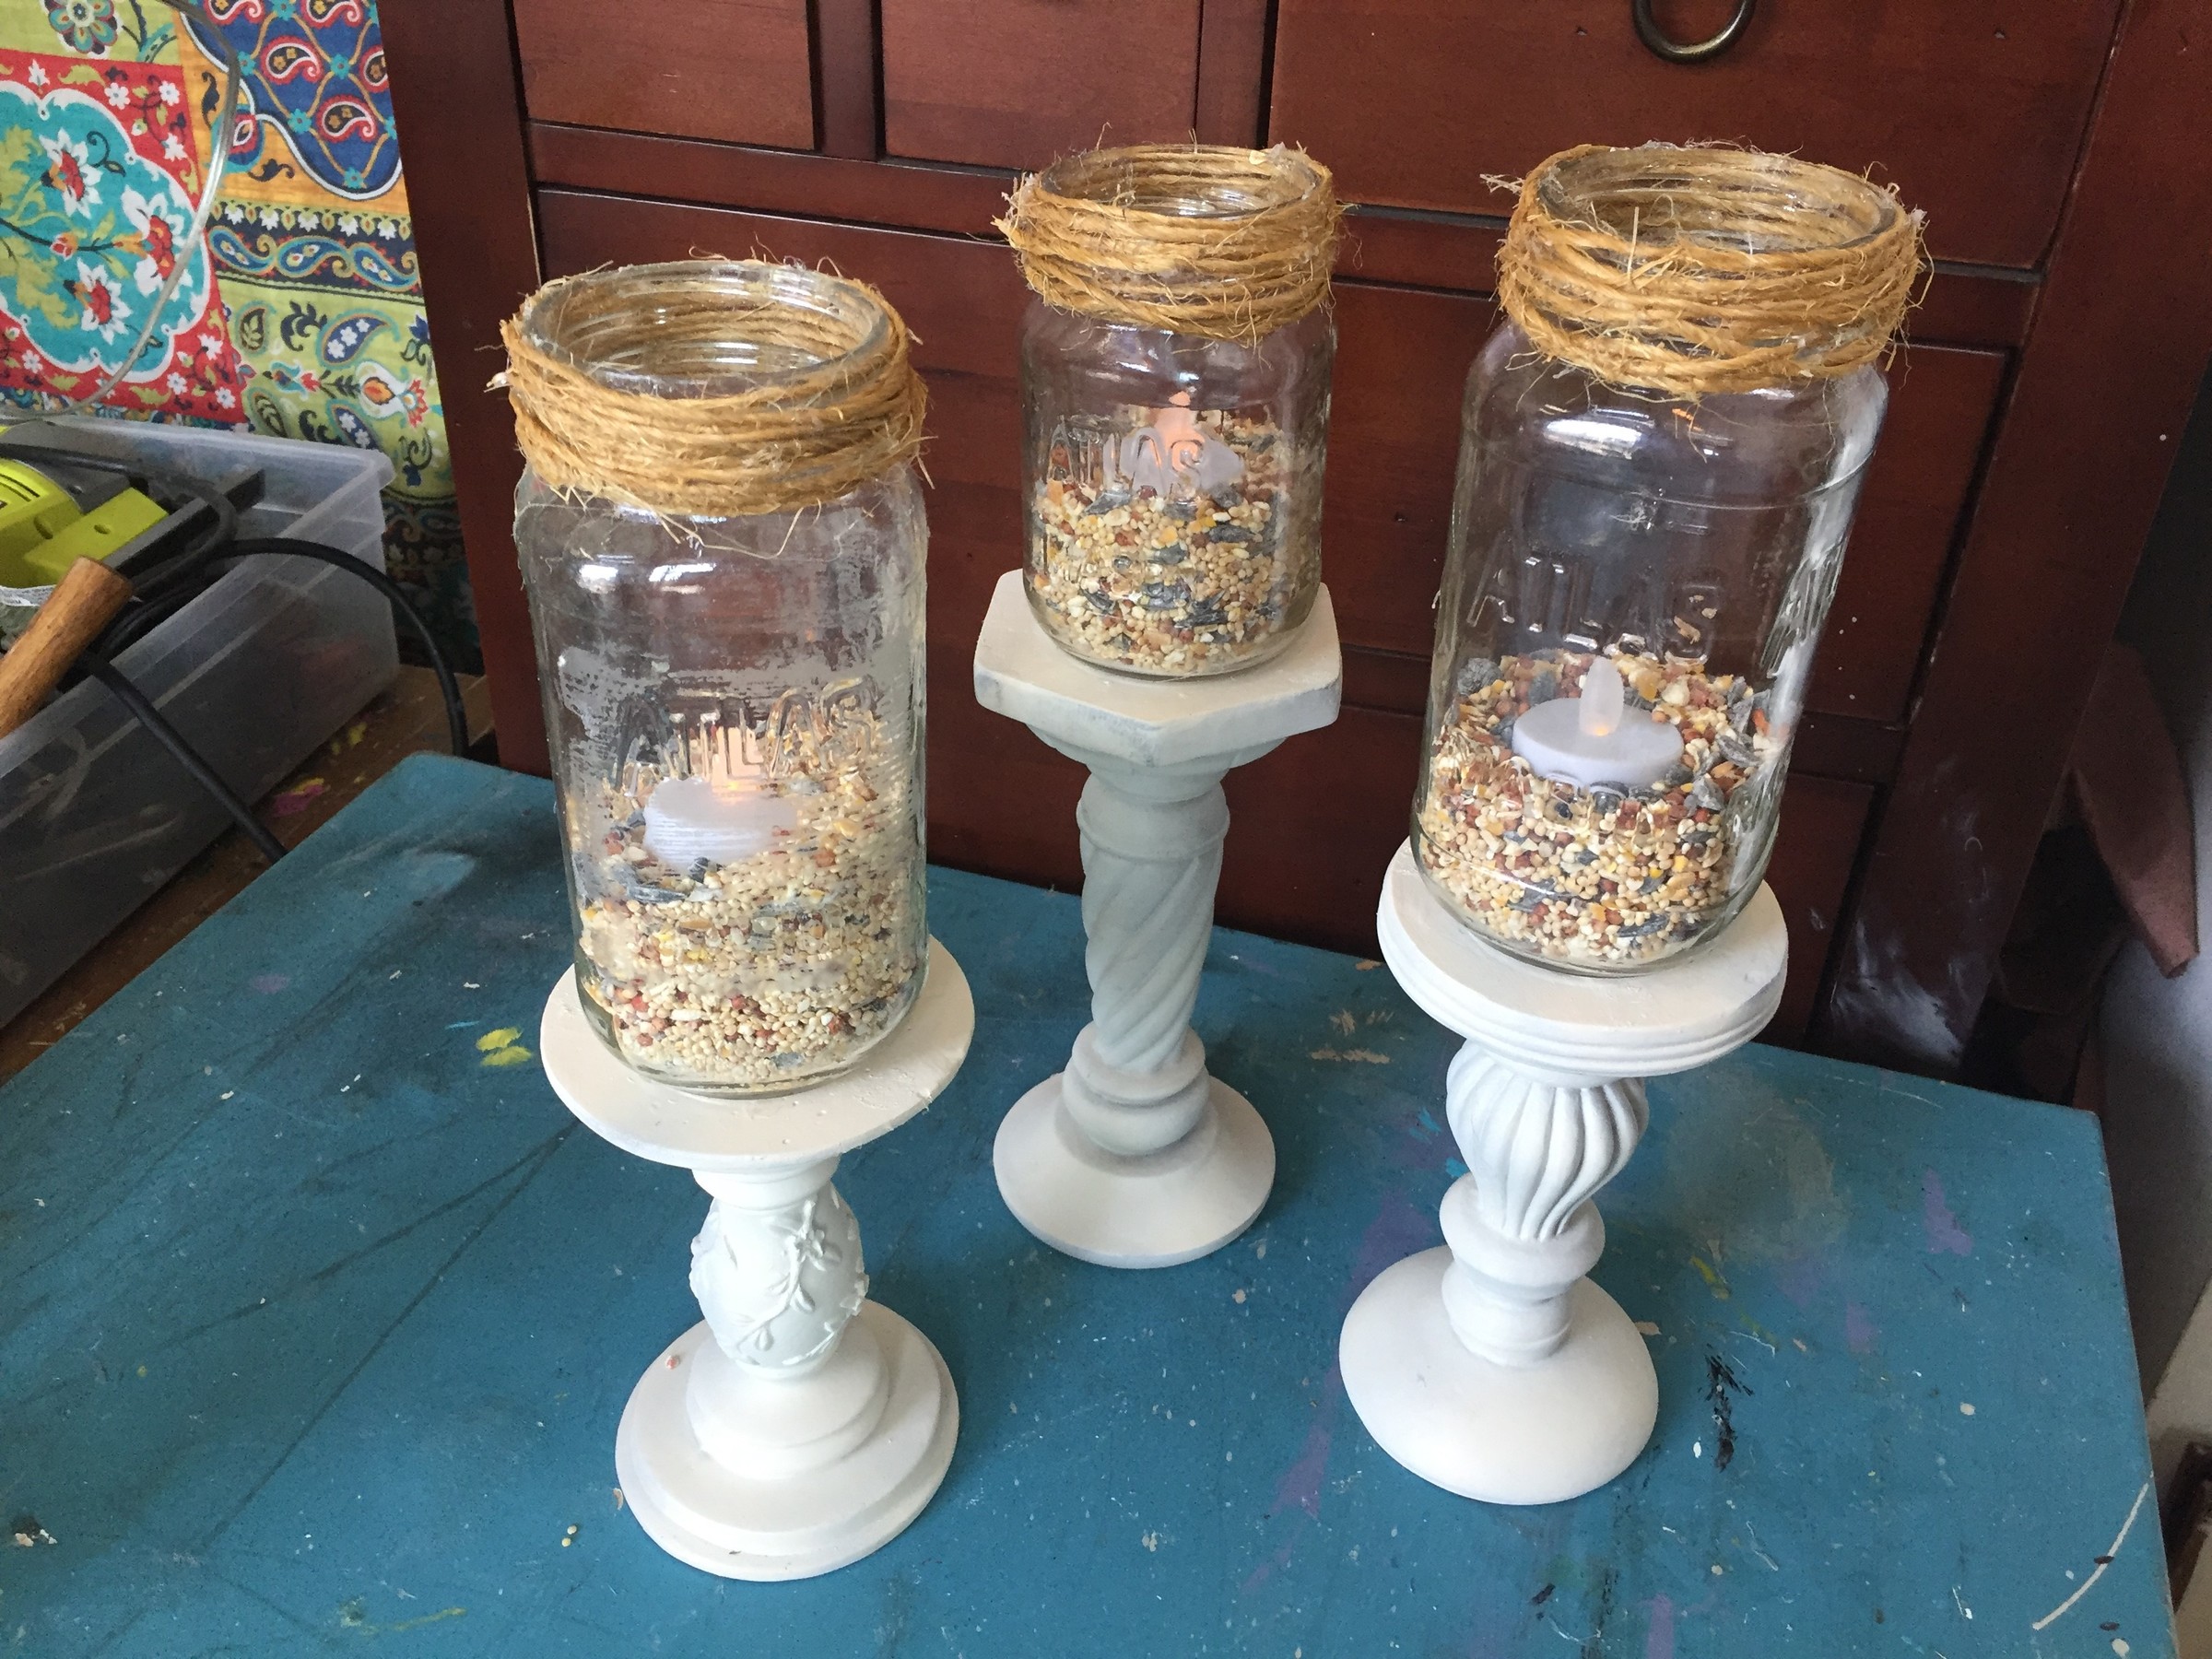 Tim adds bird seed and flame-less candles to mason jars